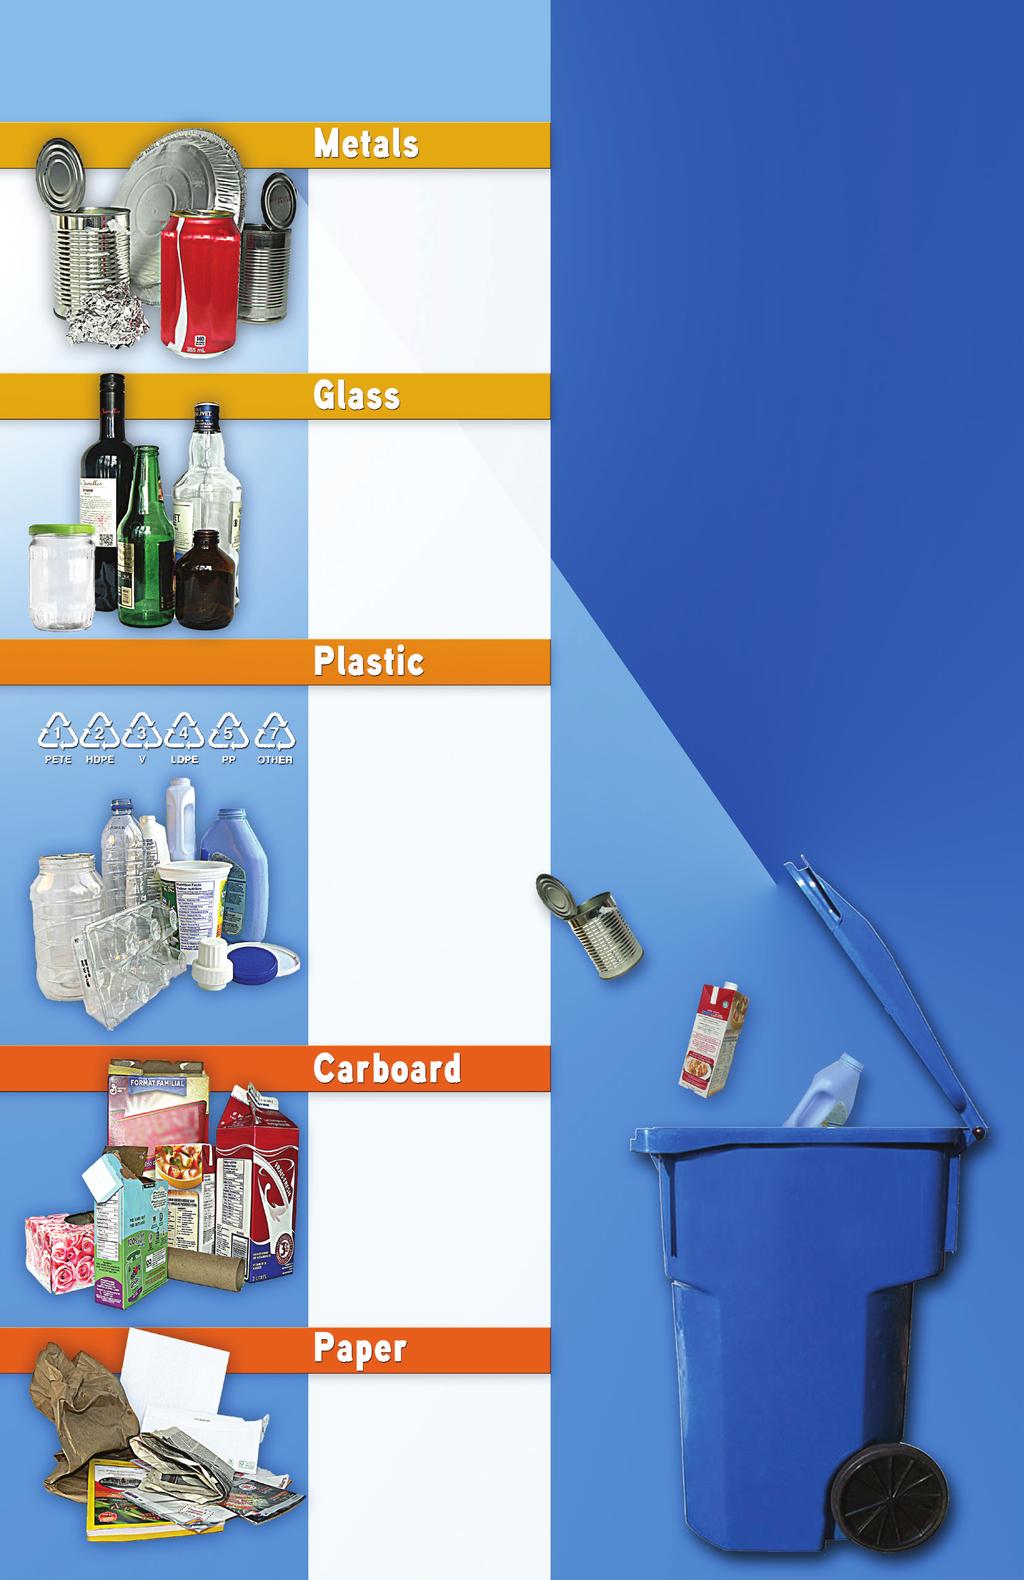 Items to place in your blue bin We recycle Printed material, packaging and containers Aluminum foil and containers Tin cans Drink cans Bottles and jars (no matter the color) Lightly rinse containers